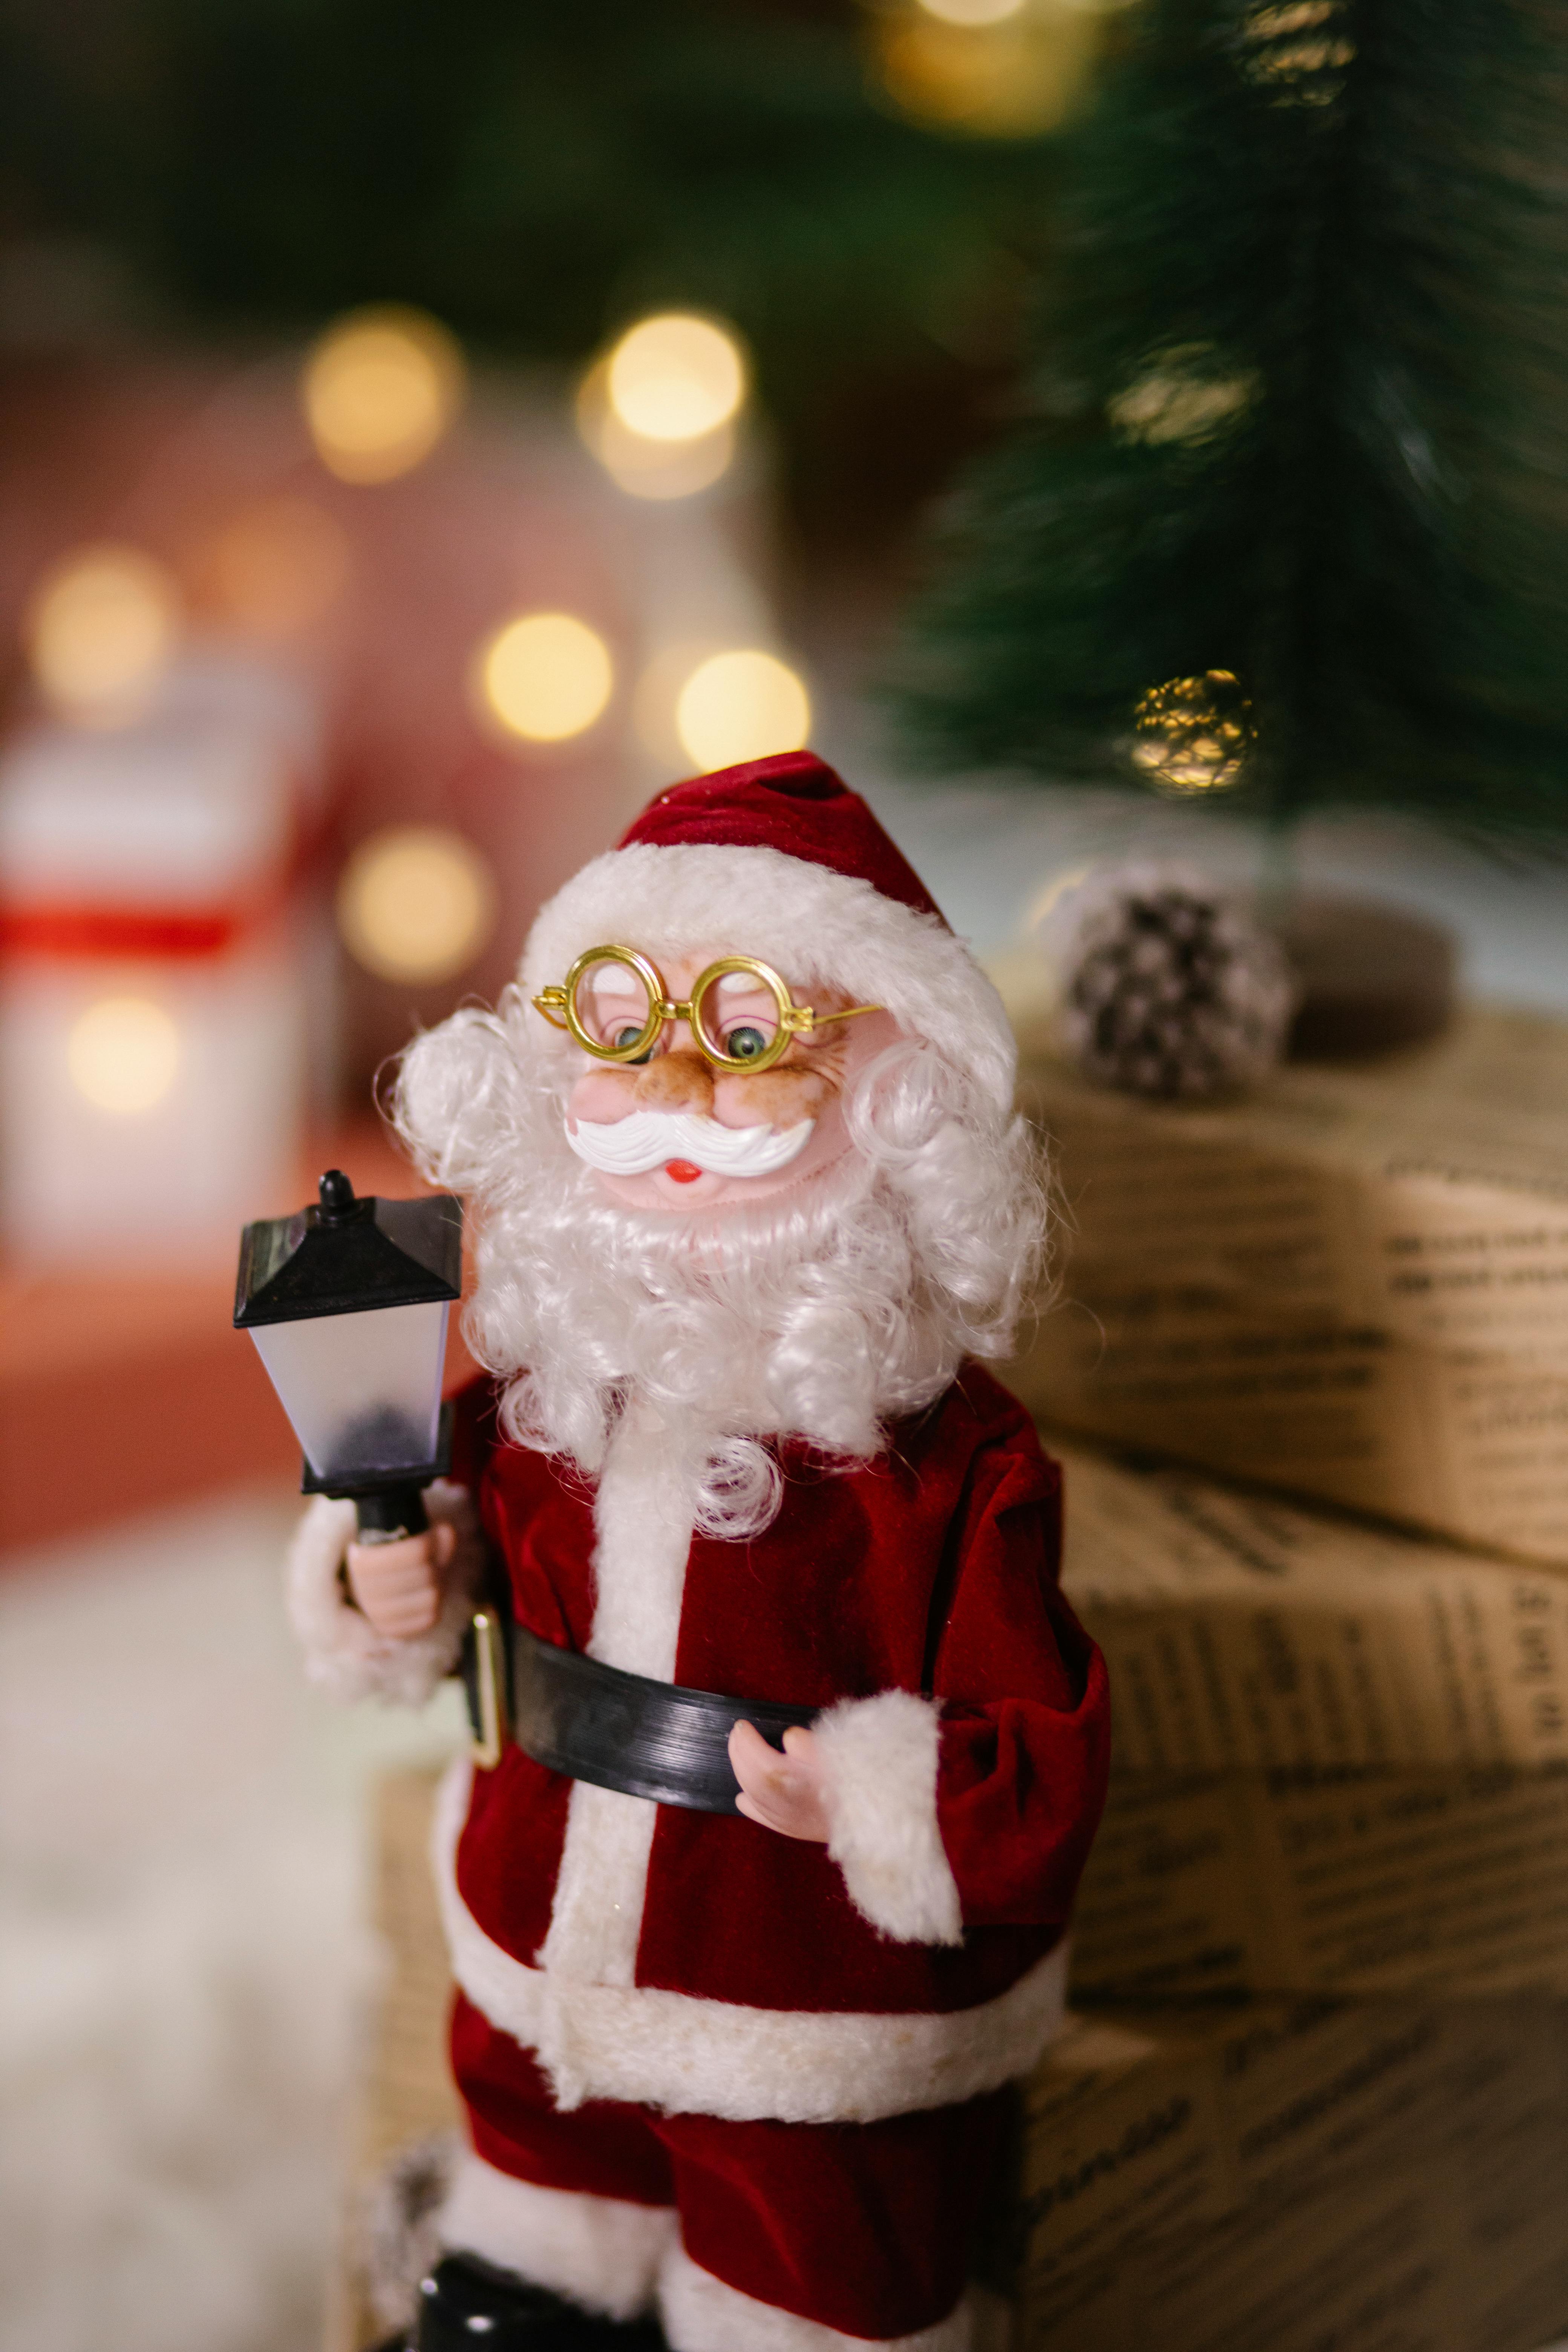 Small toy of Santa Claus in glasses placed near present boxes wrapped in decorative paper on blurred background